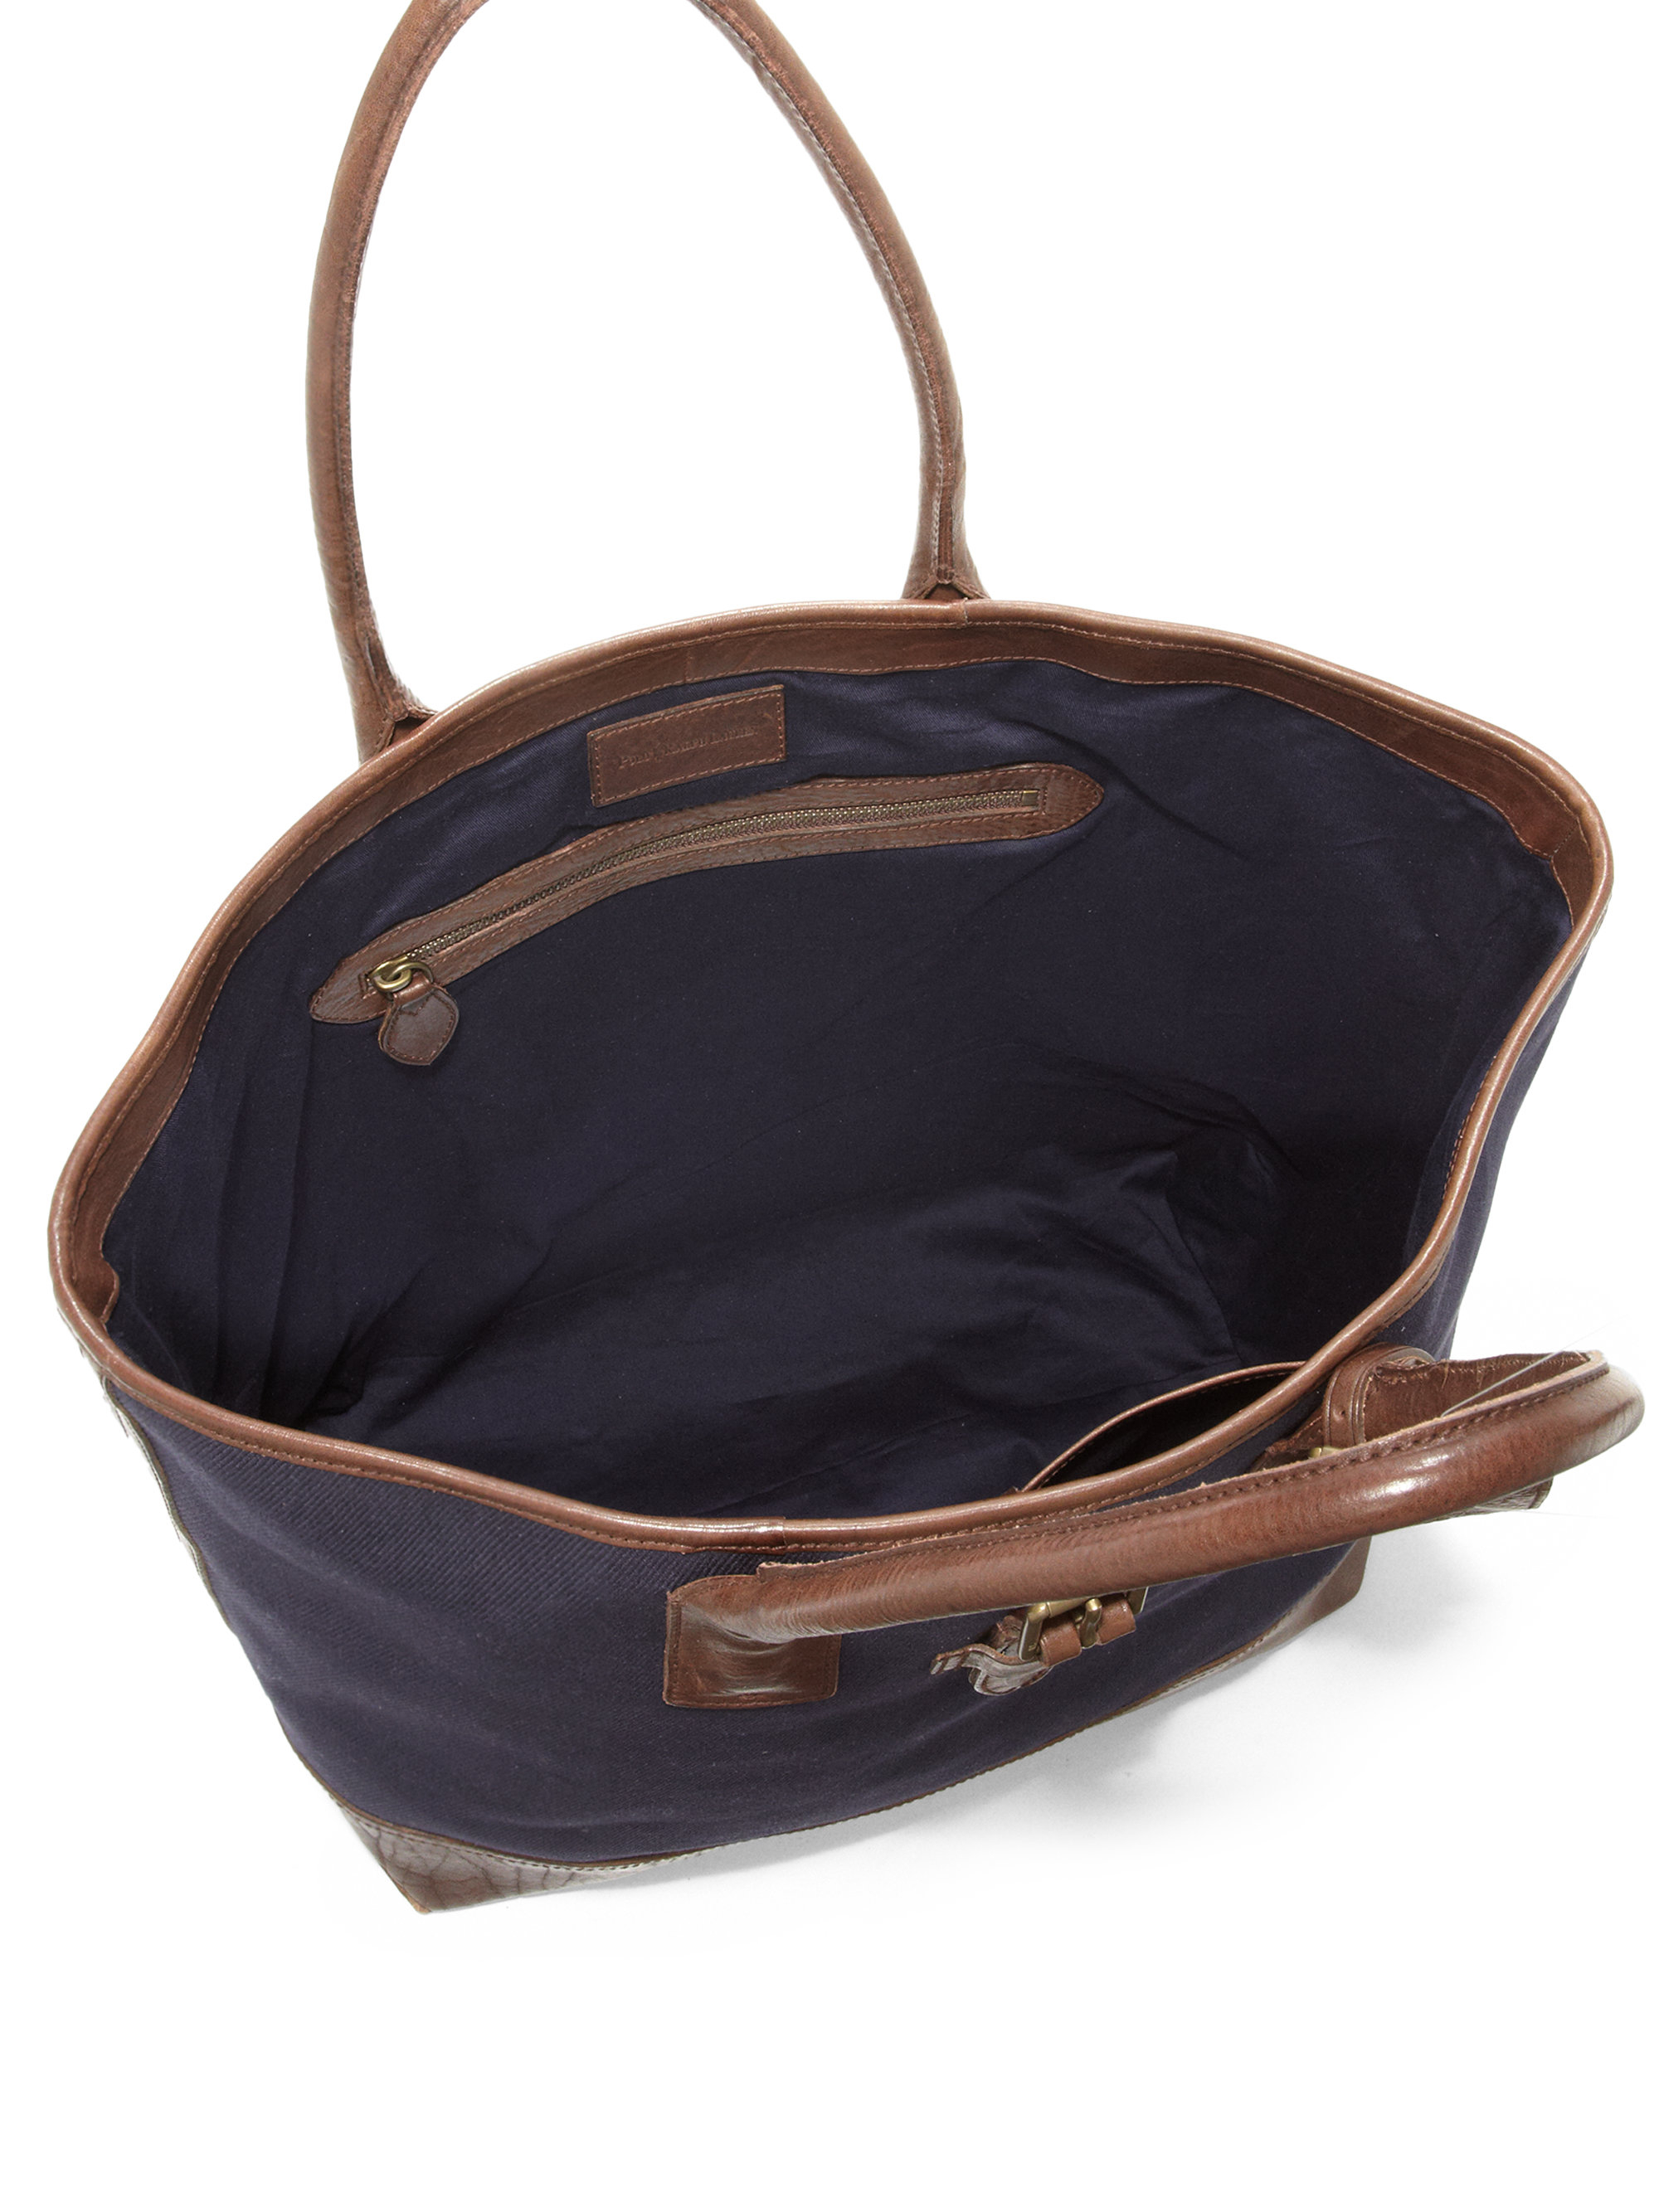 Polo Ralph Lauren Canvas Tote Bag in Navy (Blue) for Men - Lyst